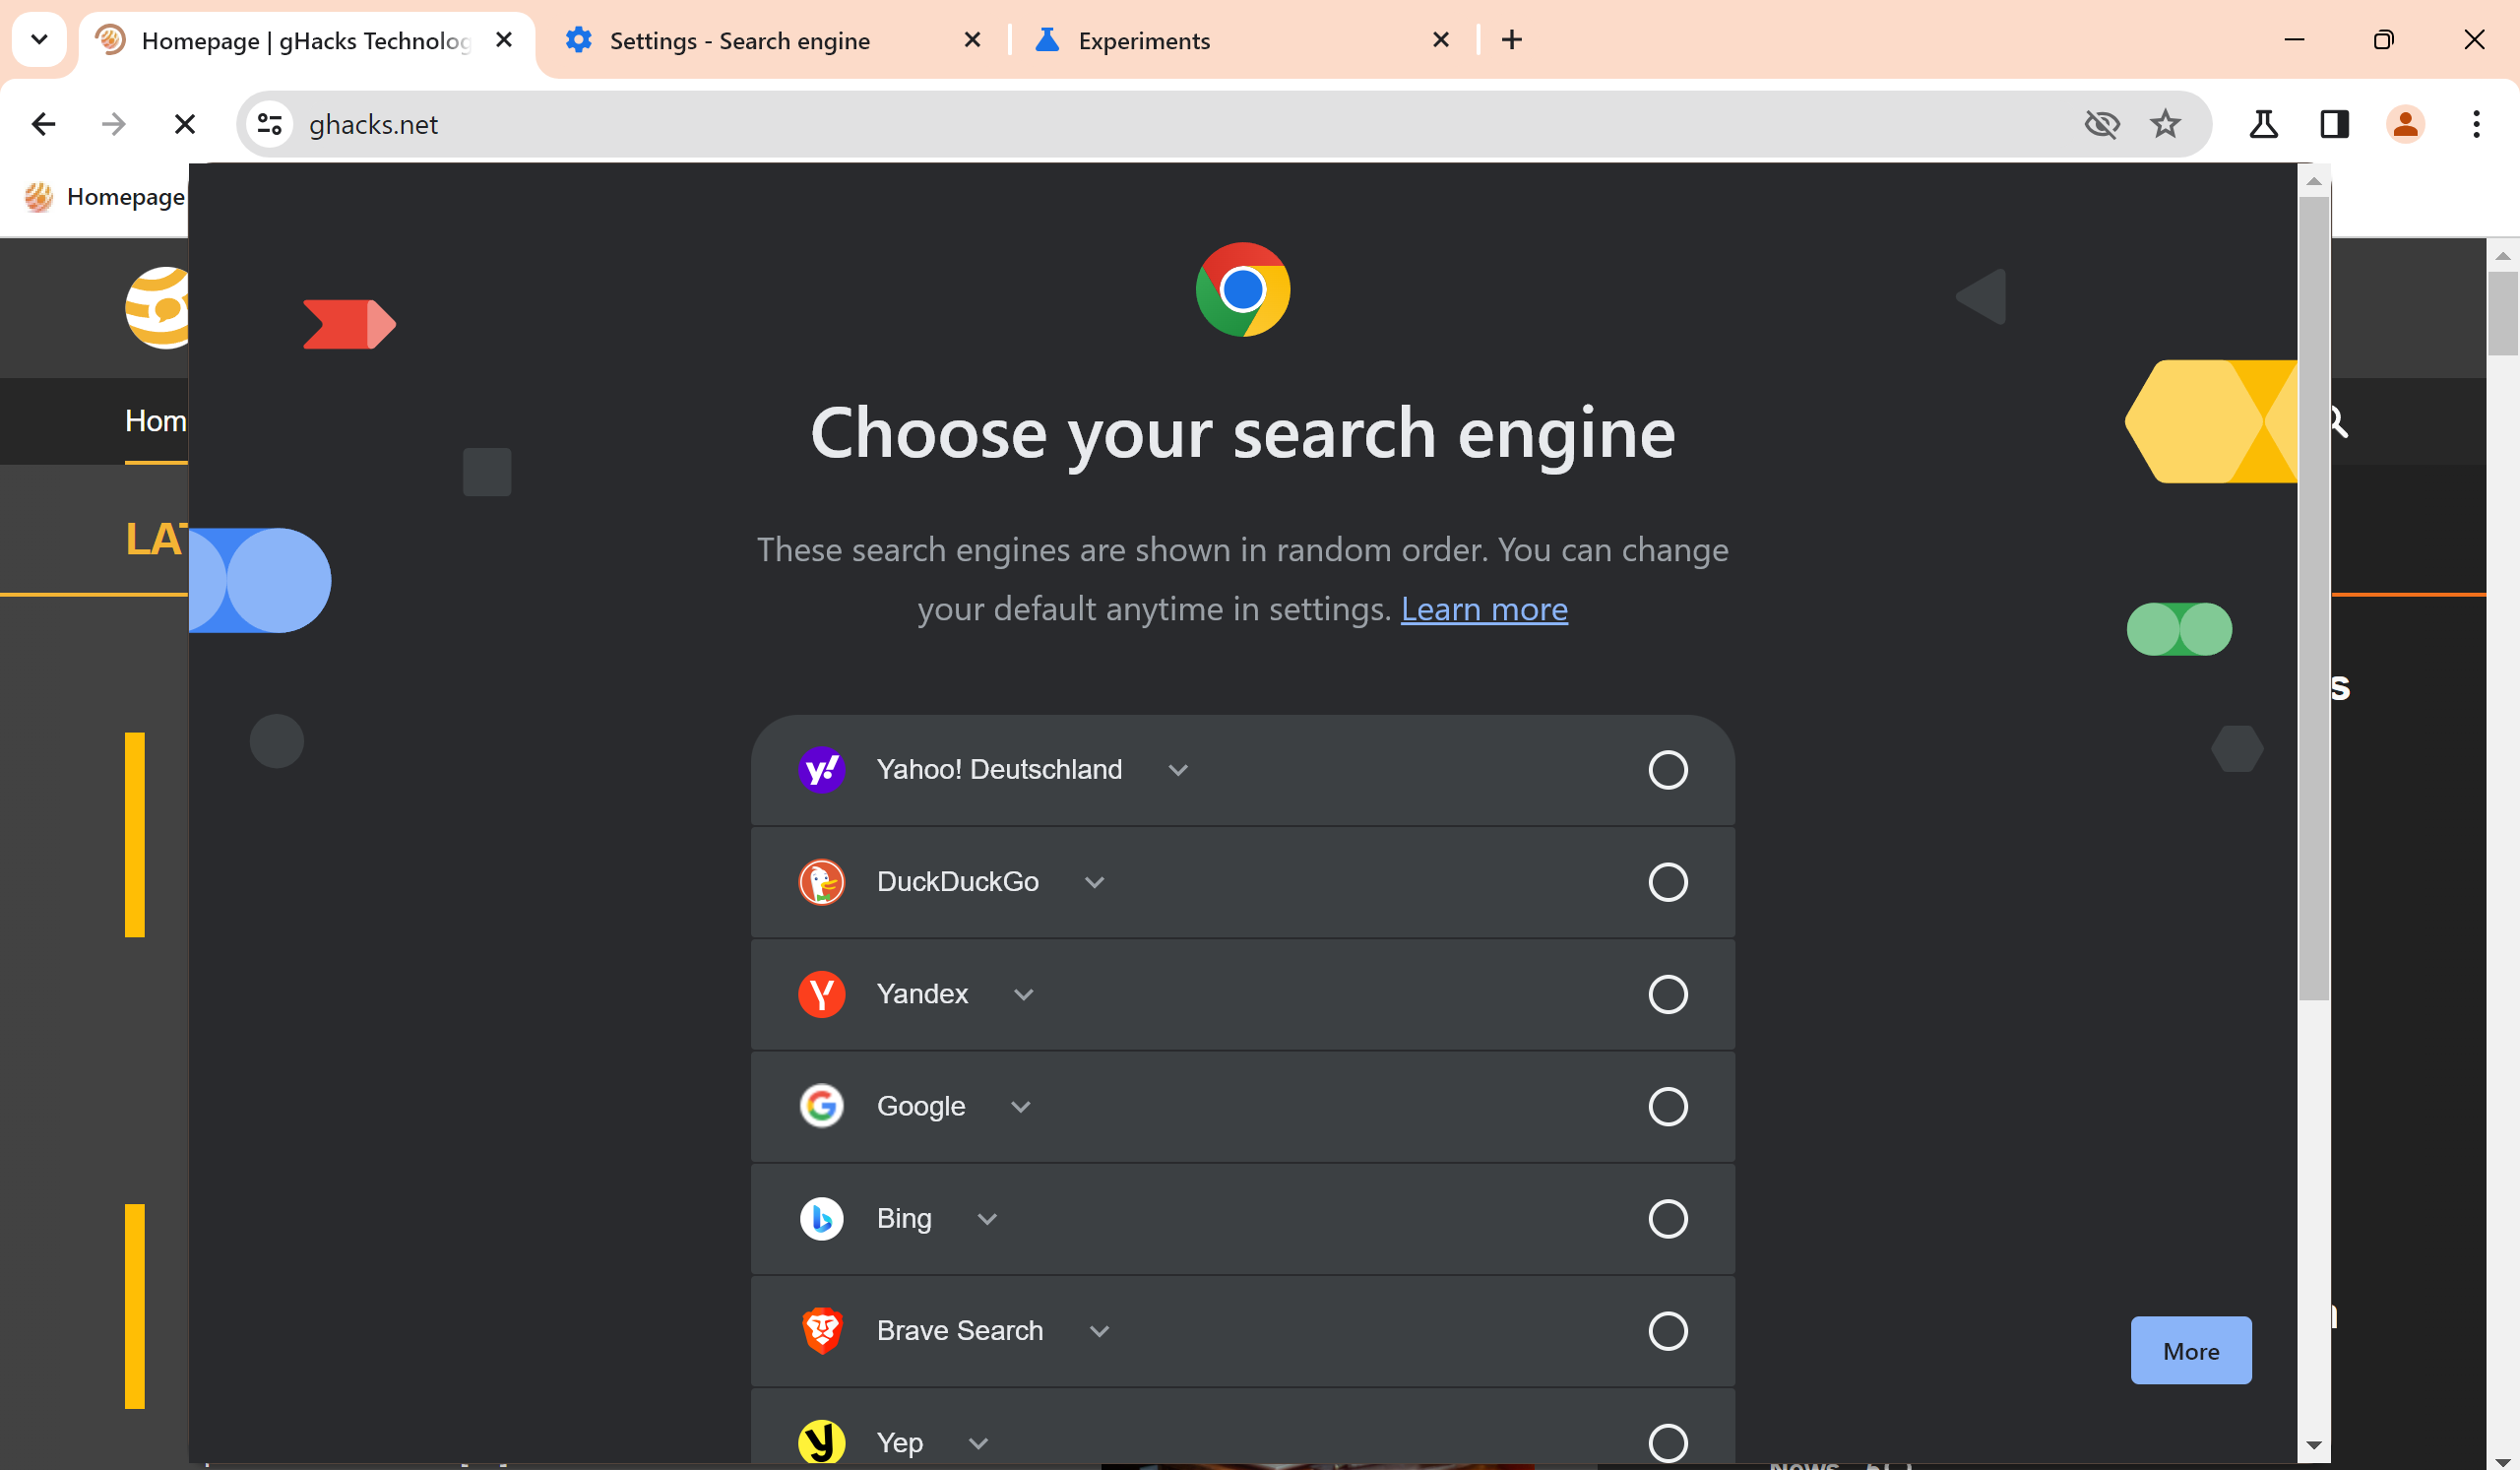 Google Chrome to display "choose your search engine" prompt